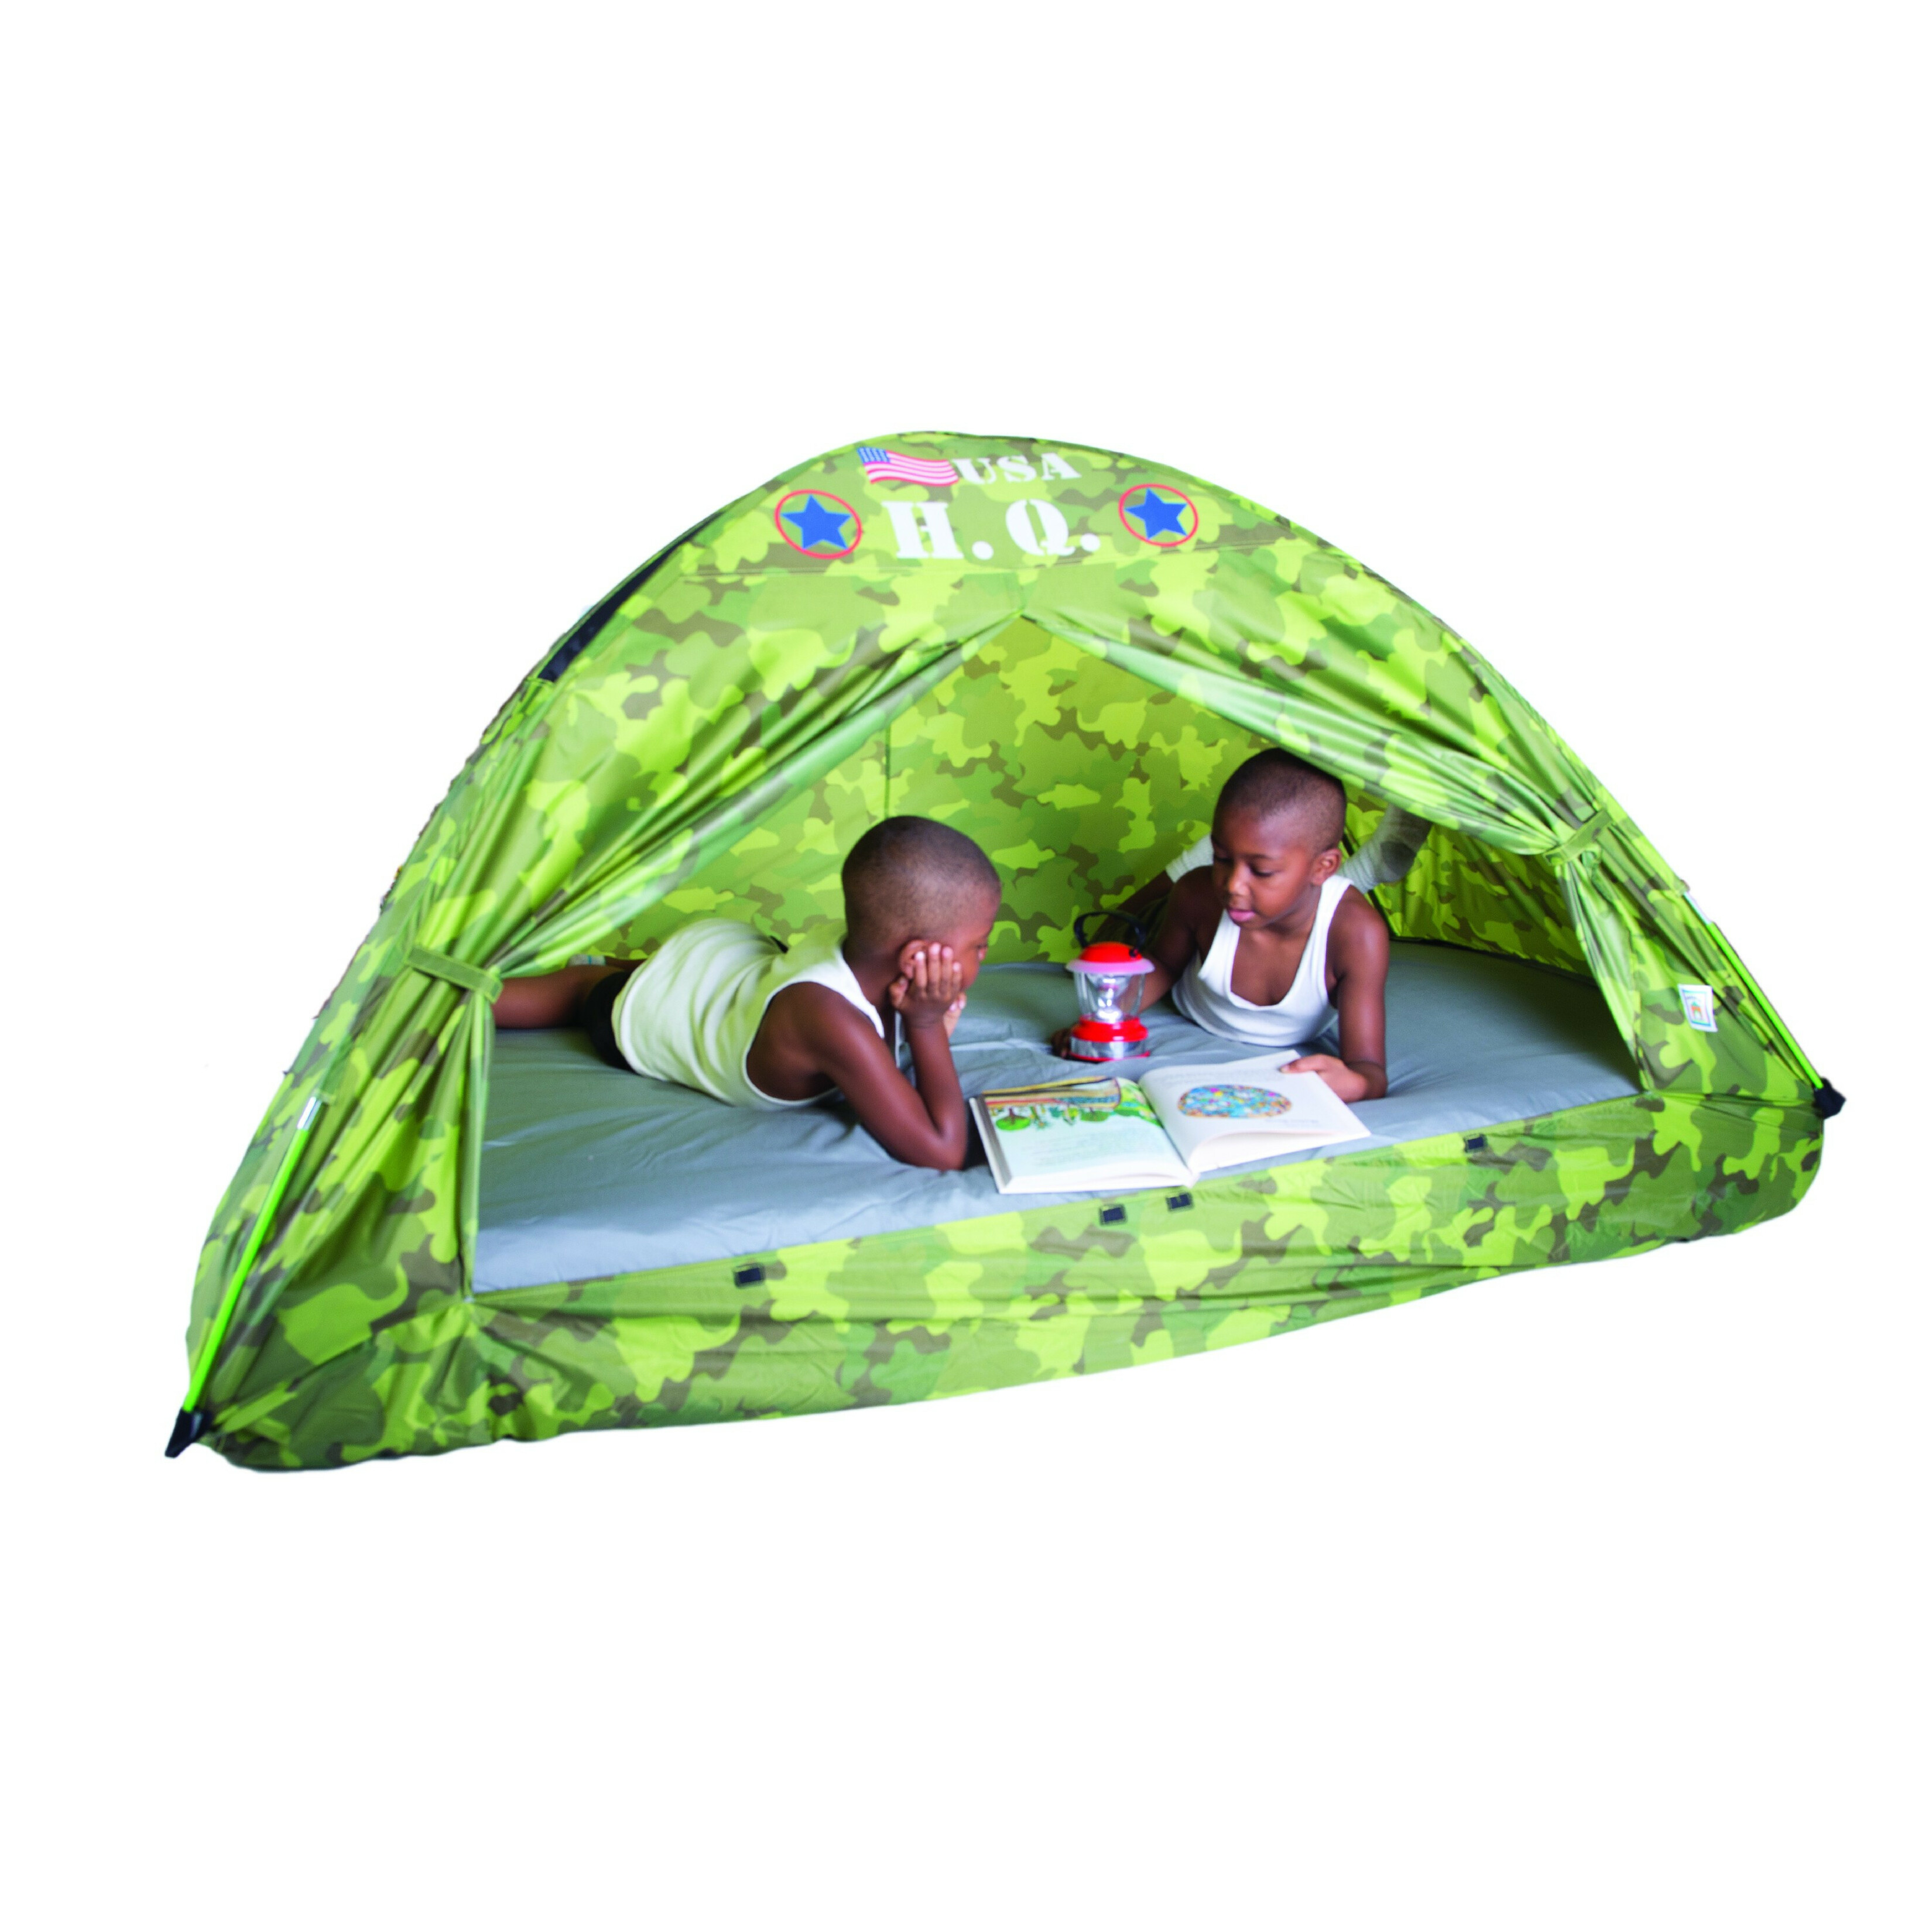 Pacific Play Tents H.Q. Bed Tent 77 inch x 38 inch x 35 inch Polyester - image 1 of 7